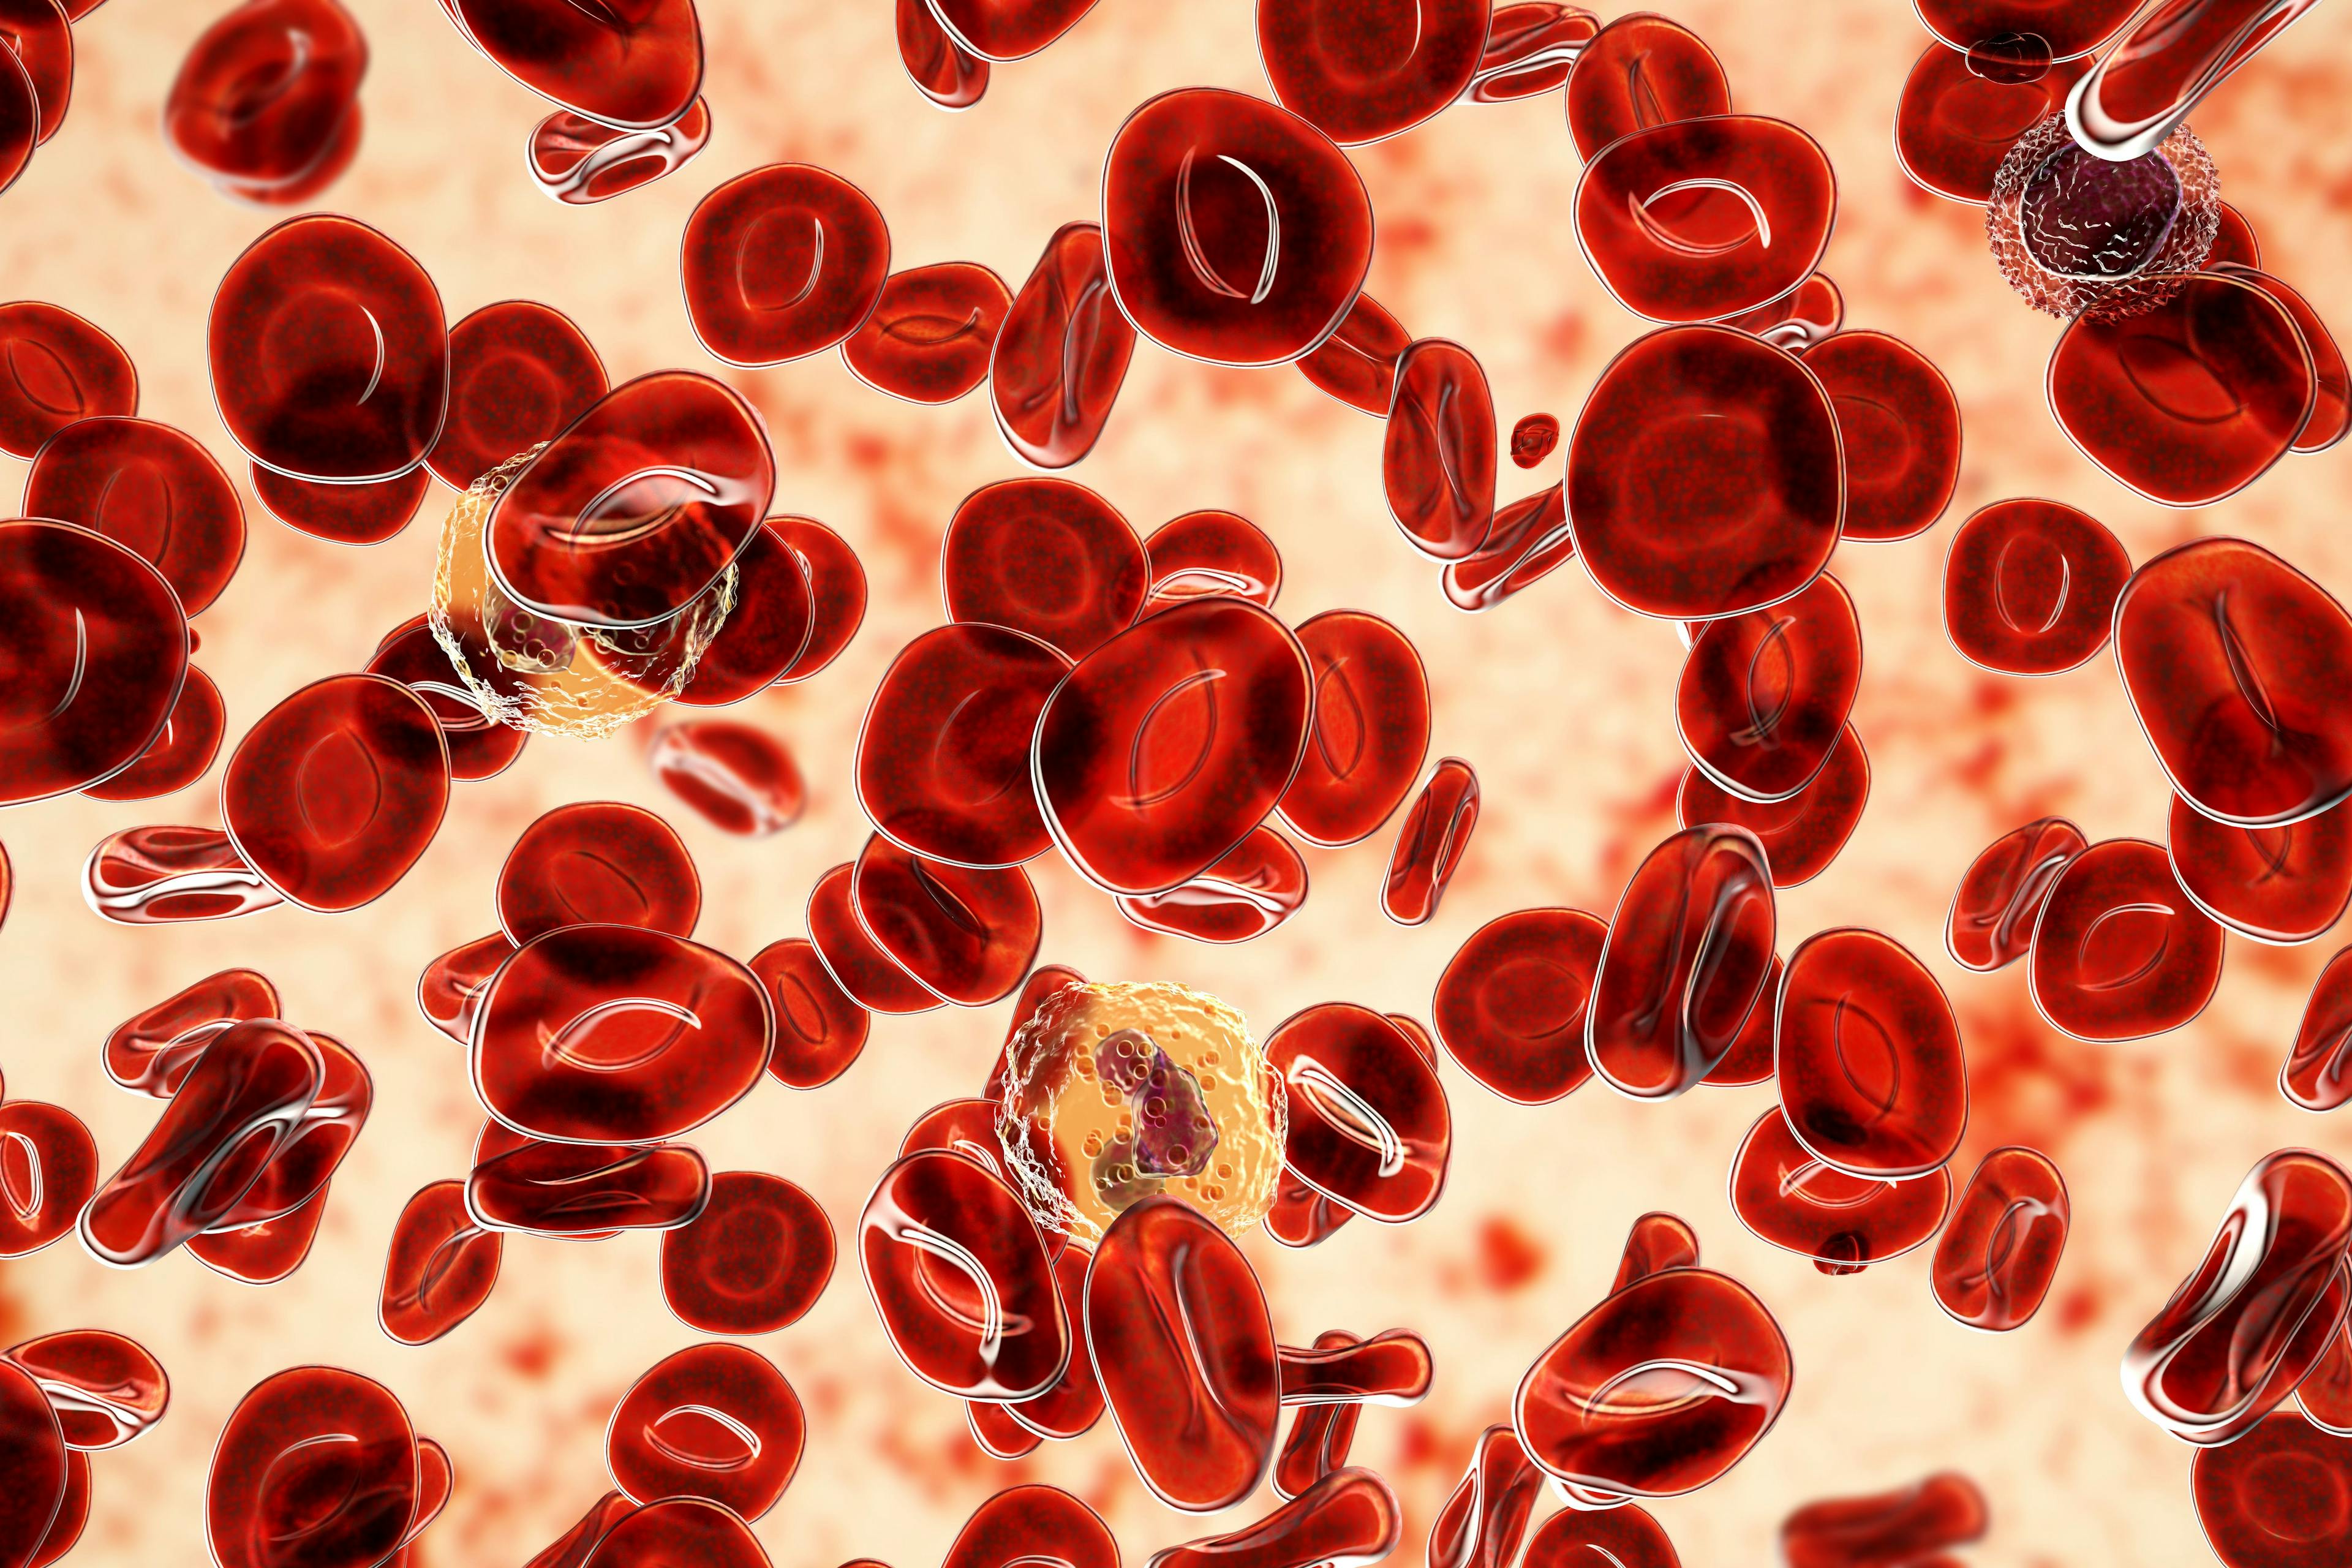 Polycythemia vera, a rare slow-growing blood cancer with an increase in the number of red blood cells | Dr_Microbe - stock.adobe.com